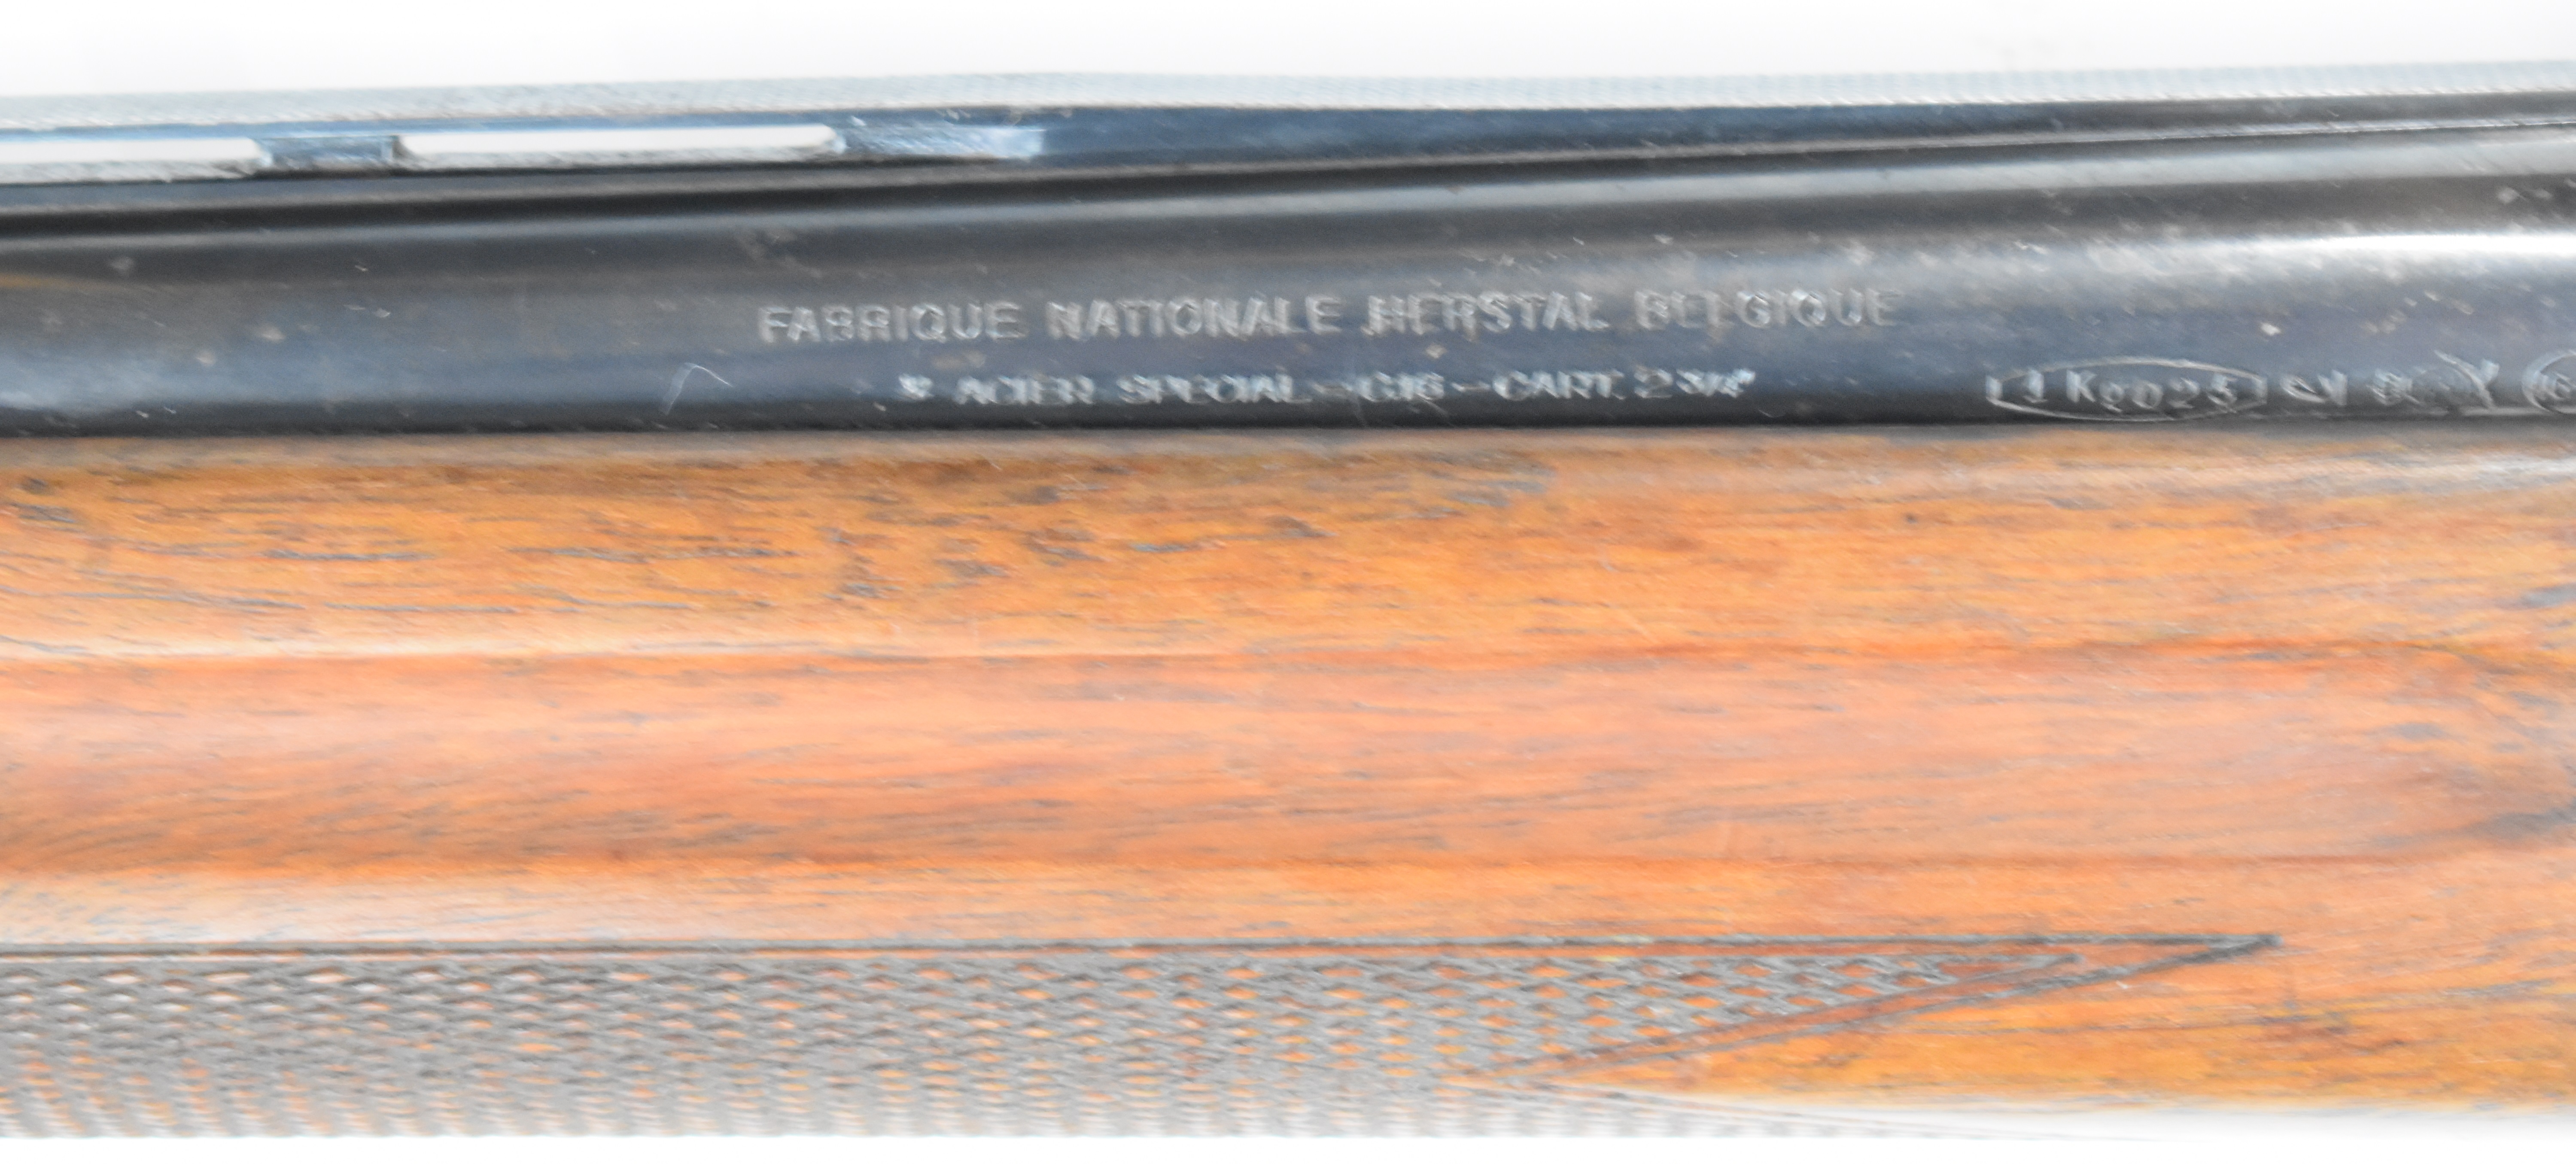 Browning 16 bore 3-shot semi-automatic shotgun with chequered semi-pistol grip and forend and 27 - Image 11 of 18